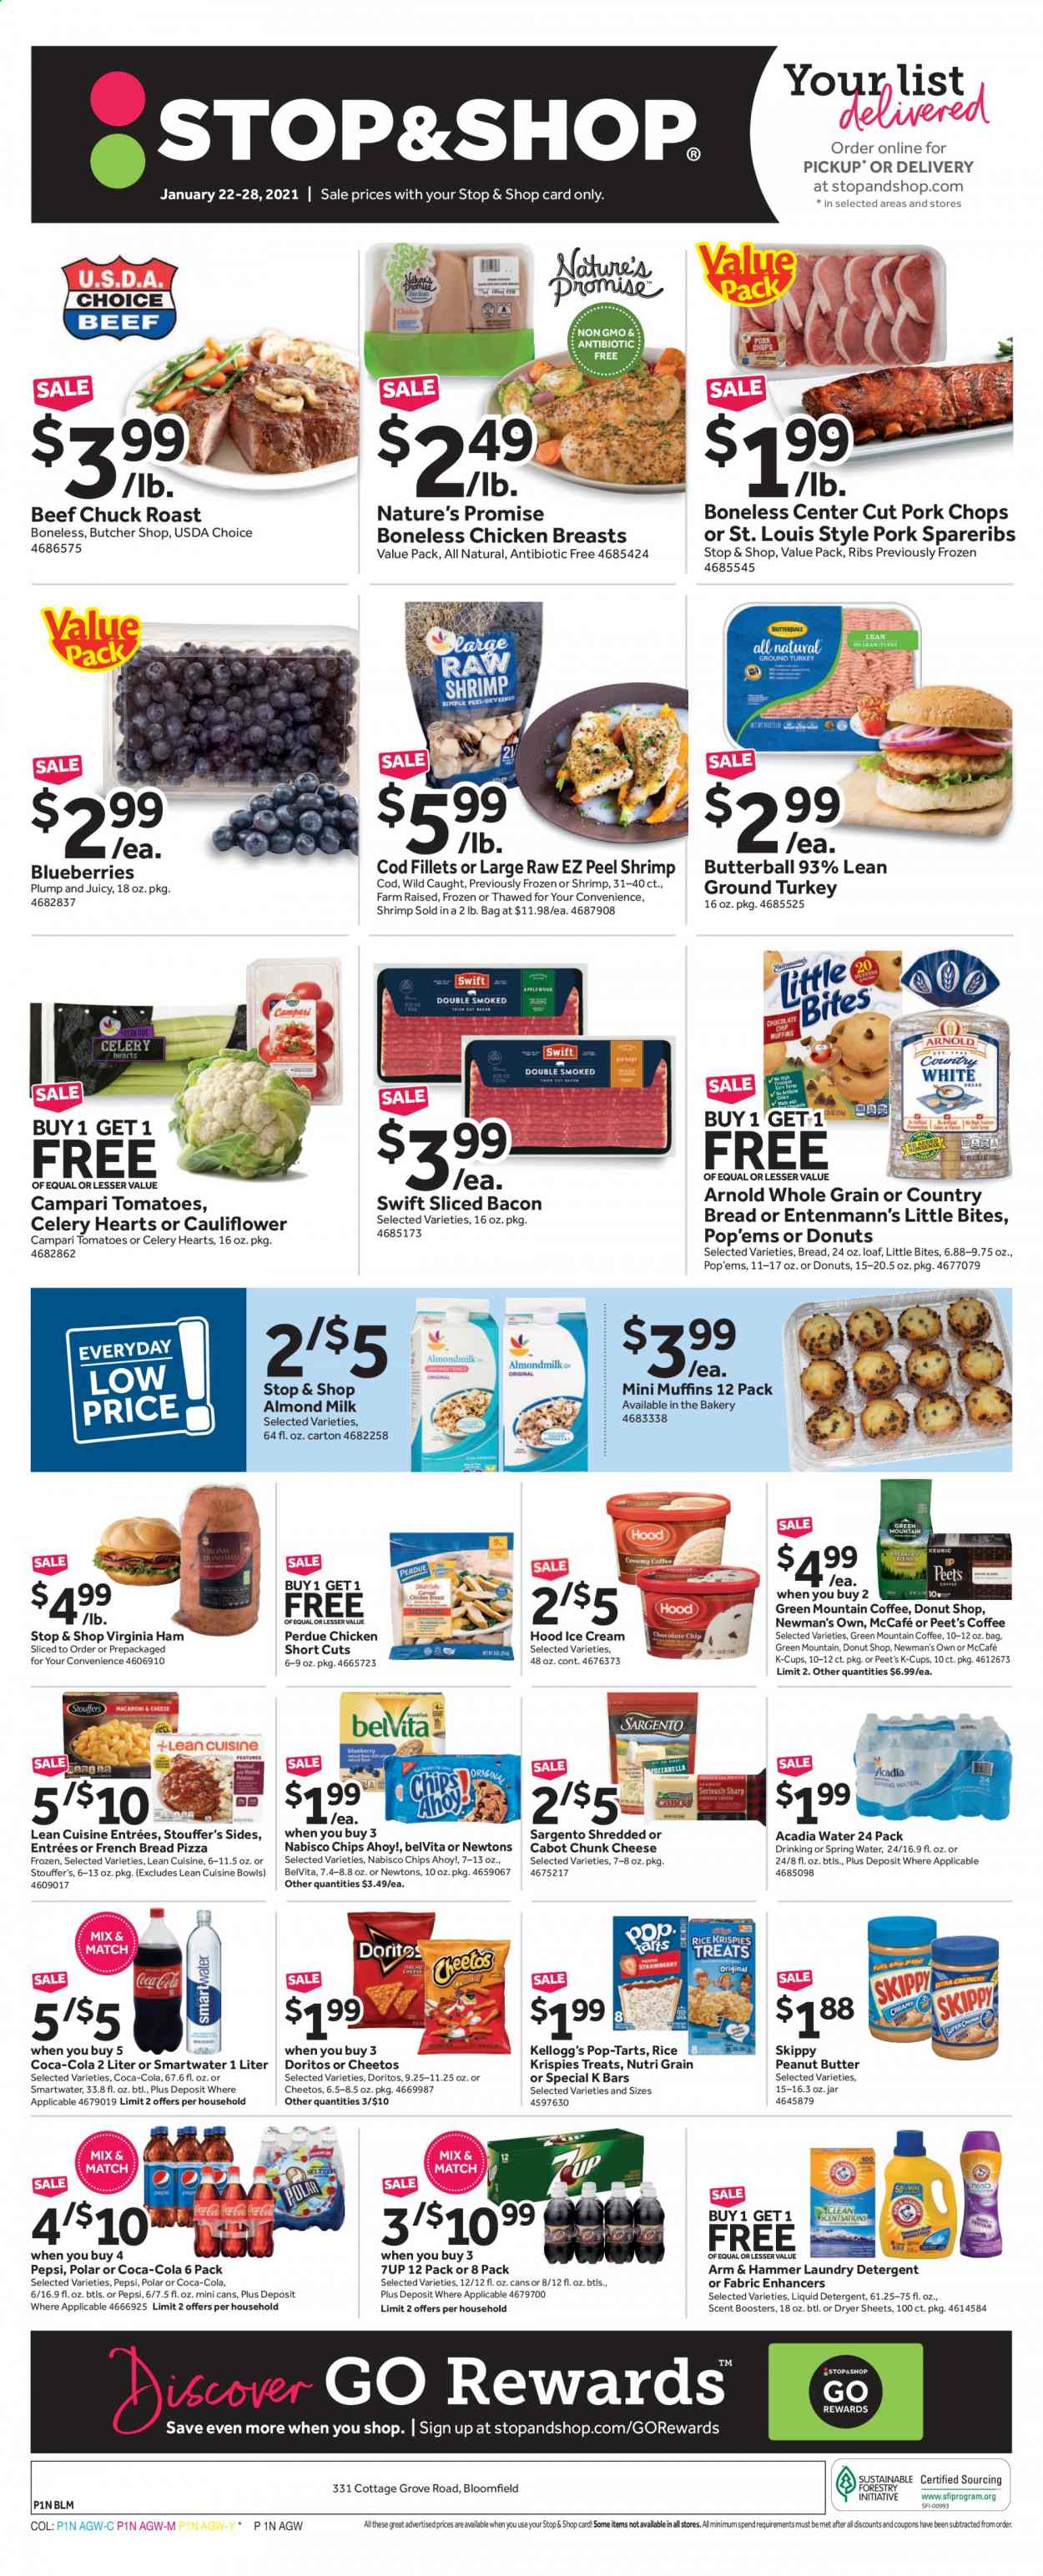 thumbnail - Stop & Shop Flyer - 01/22/2021 - 01/28/2021 - Sales products - blueberries, bread, Nature’s Promise, Entenmann's, Little Bites, Butterball, ground turkey, chicken breasts, Perdue®, beef meat, chuck roast, pork chops, pork meat, pork spare ribs, cod, shrimps, pizza, Lean Cuisine, bacon, ham, virginia ham, cheese, chunk cheese, Sargento, almond milk, ice cream, celery, Kellogg's, Pop-Tarts, Chips Ahoy!, Doritos, Cheetos, ARM & HAMMER, Rice Krispies, belVita, Nutri-Grain, peanut butter, Coca-Cola, Pepsi, 7UP, spring water, Acadia, coffee capsules, McCafe, K-Cups, Green Mountain, laundry detergent, dryer sheets, scent booster, liquid detergent. Page 1.